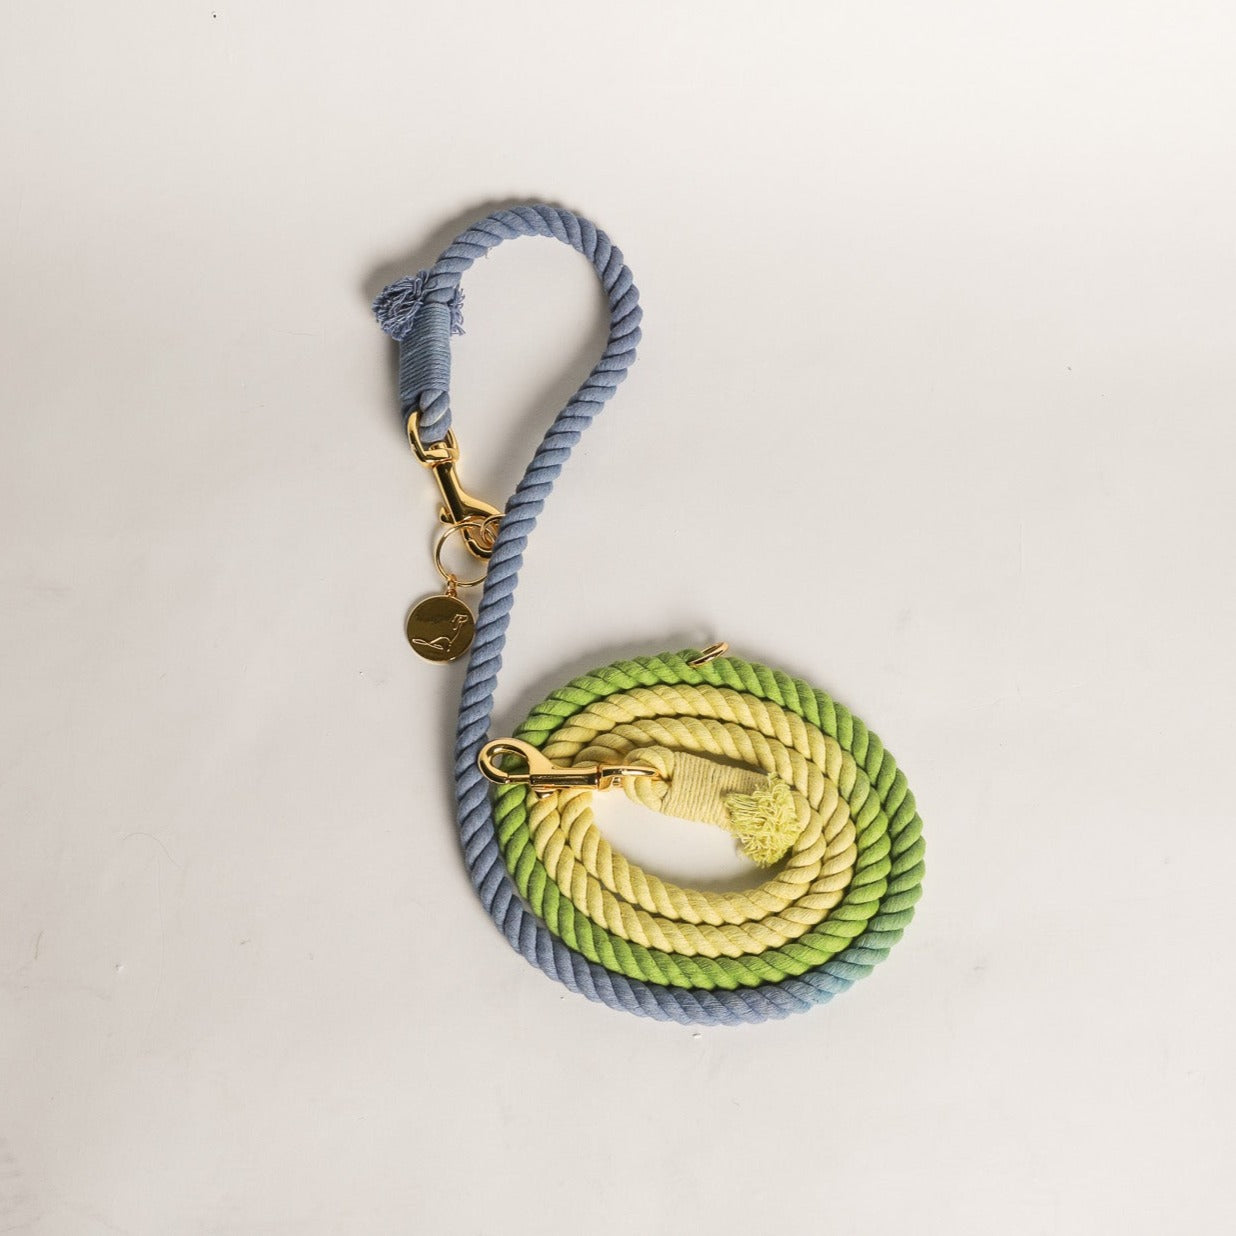 DOG LEASH HANDS FREE COTTON ROPE - Ombré Blue Green Yellow